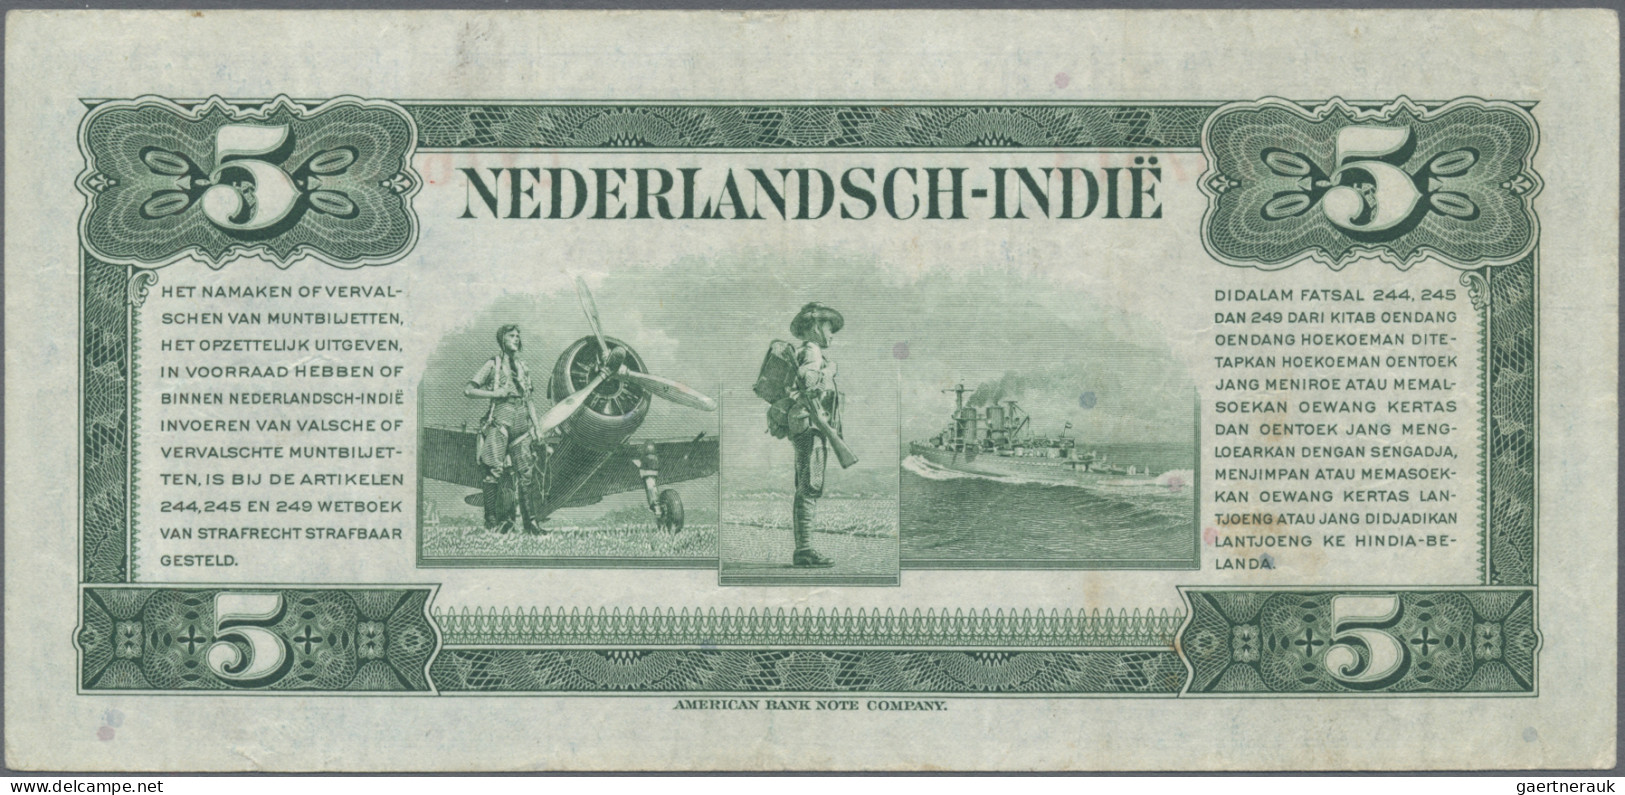 Netherlands Indies: Ministry of Finance / Javasche Bank, nice set with 5 banknot